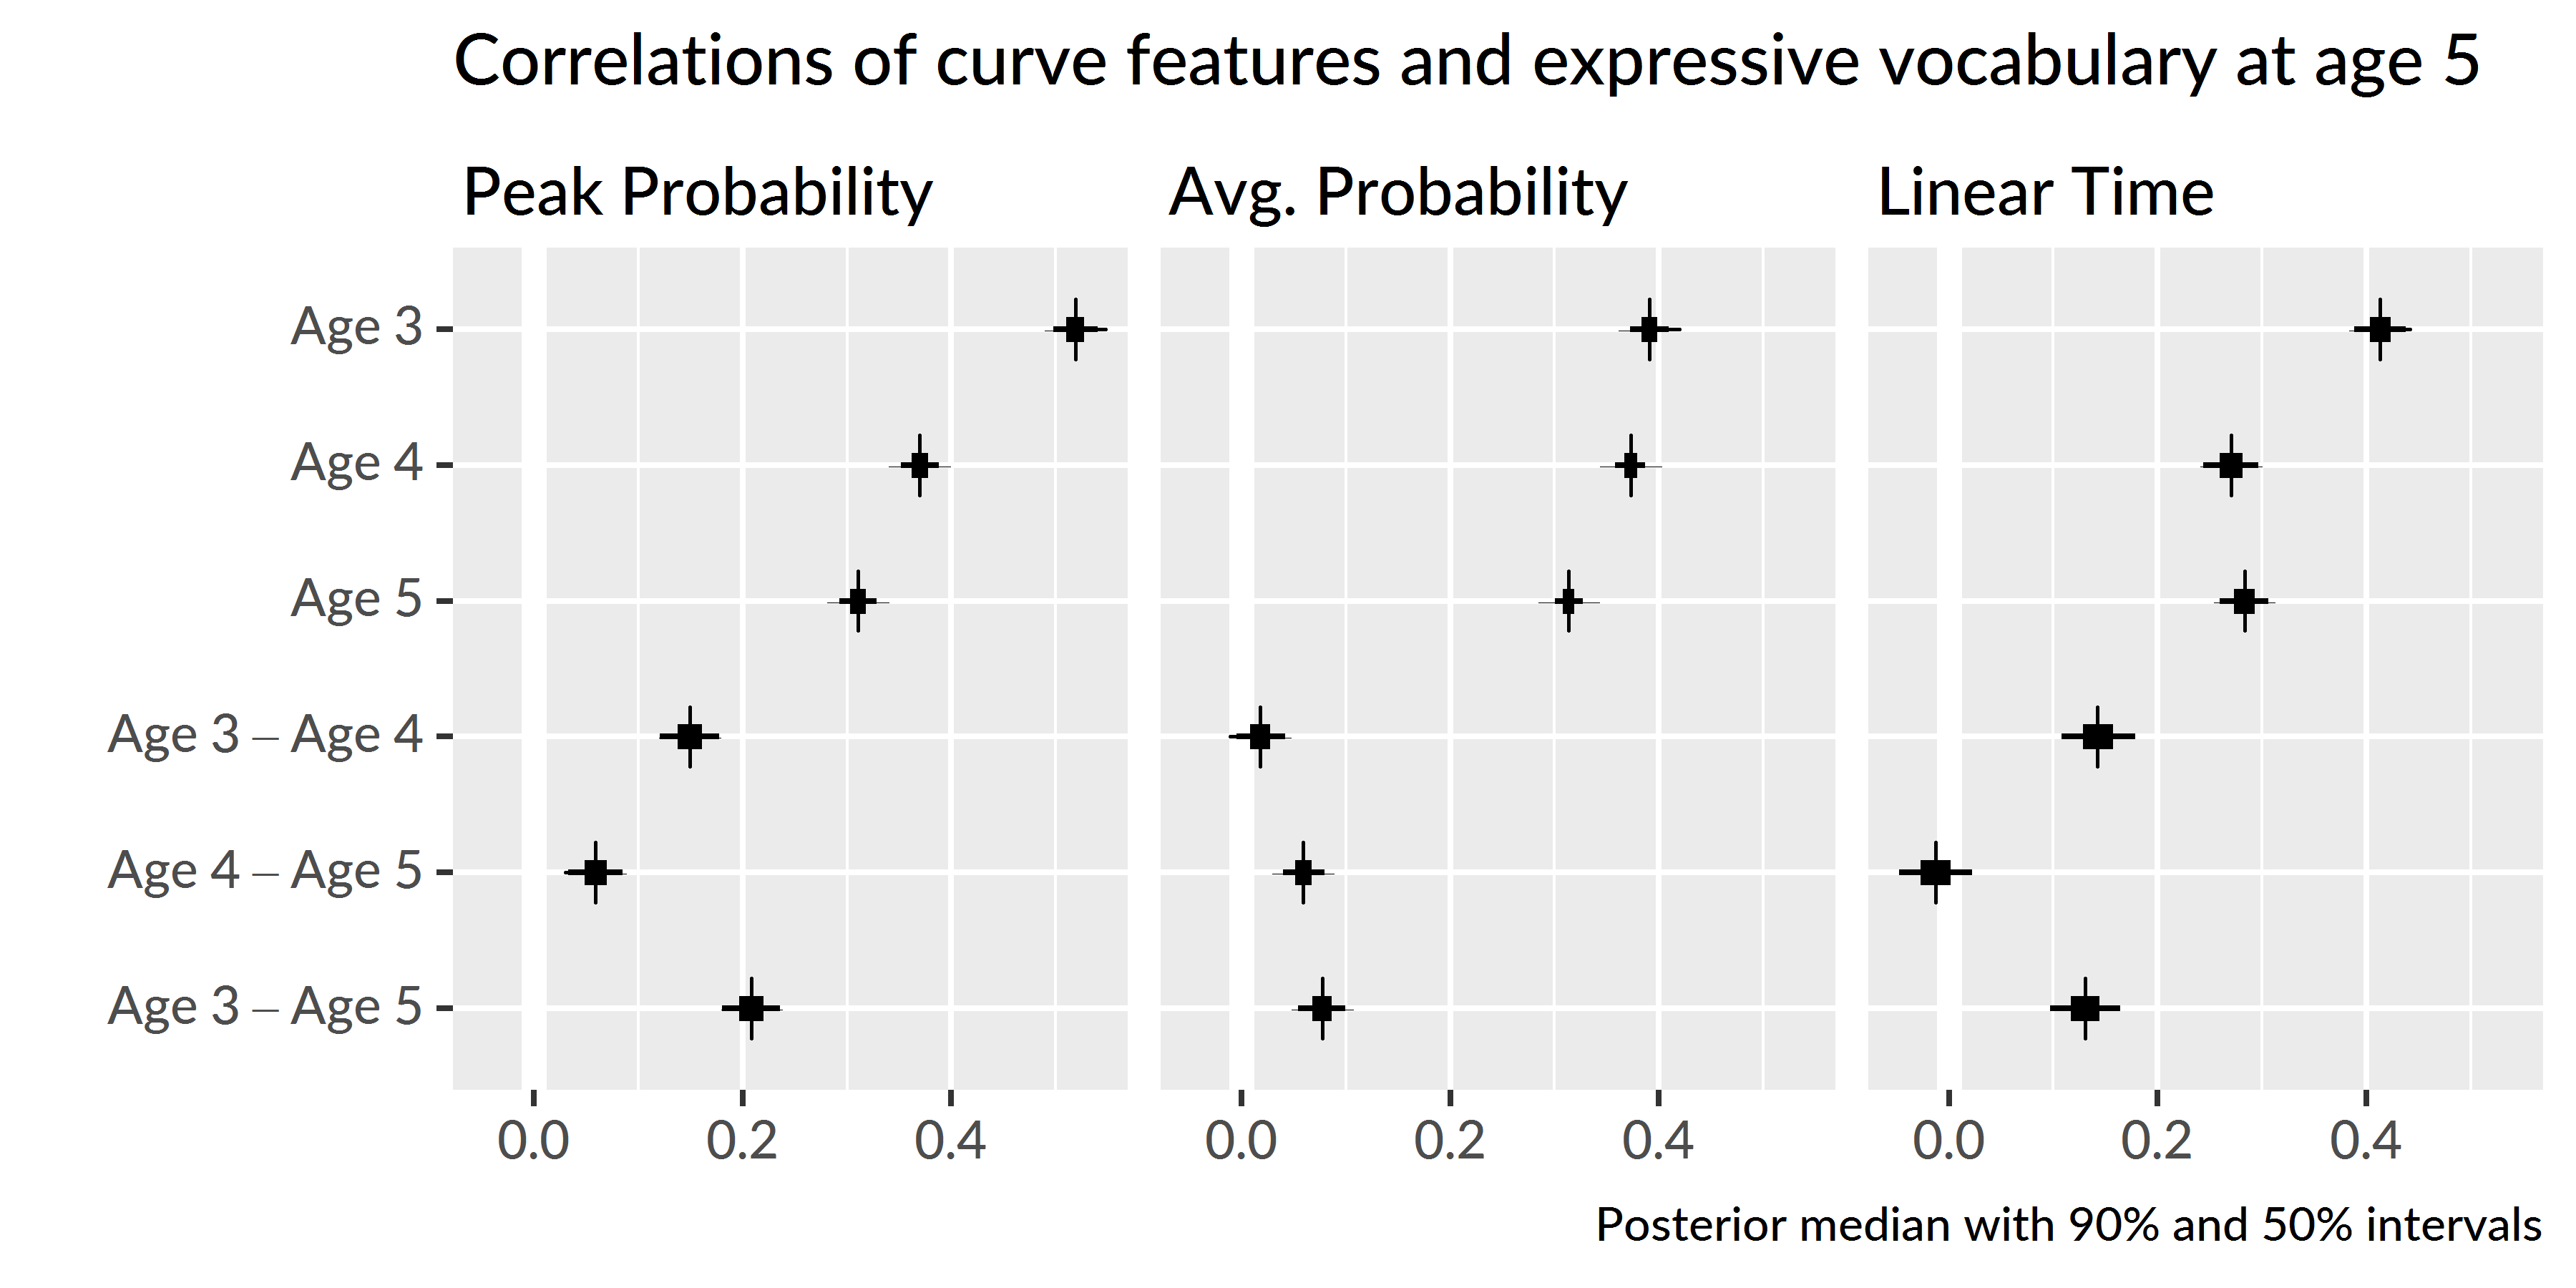 Uncertainty intervals for the correlations of growth curve features at each age with age-5 expressive vocabulary (EVT-2 standard scores). The bottom rows provide intervals for the pairwise differences in correlations between timepoints. For example, the top row of the left panel is the correlation between age-3 peak probability and age-5 expressive vocabulary.